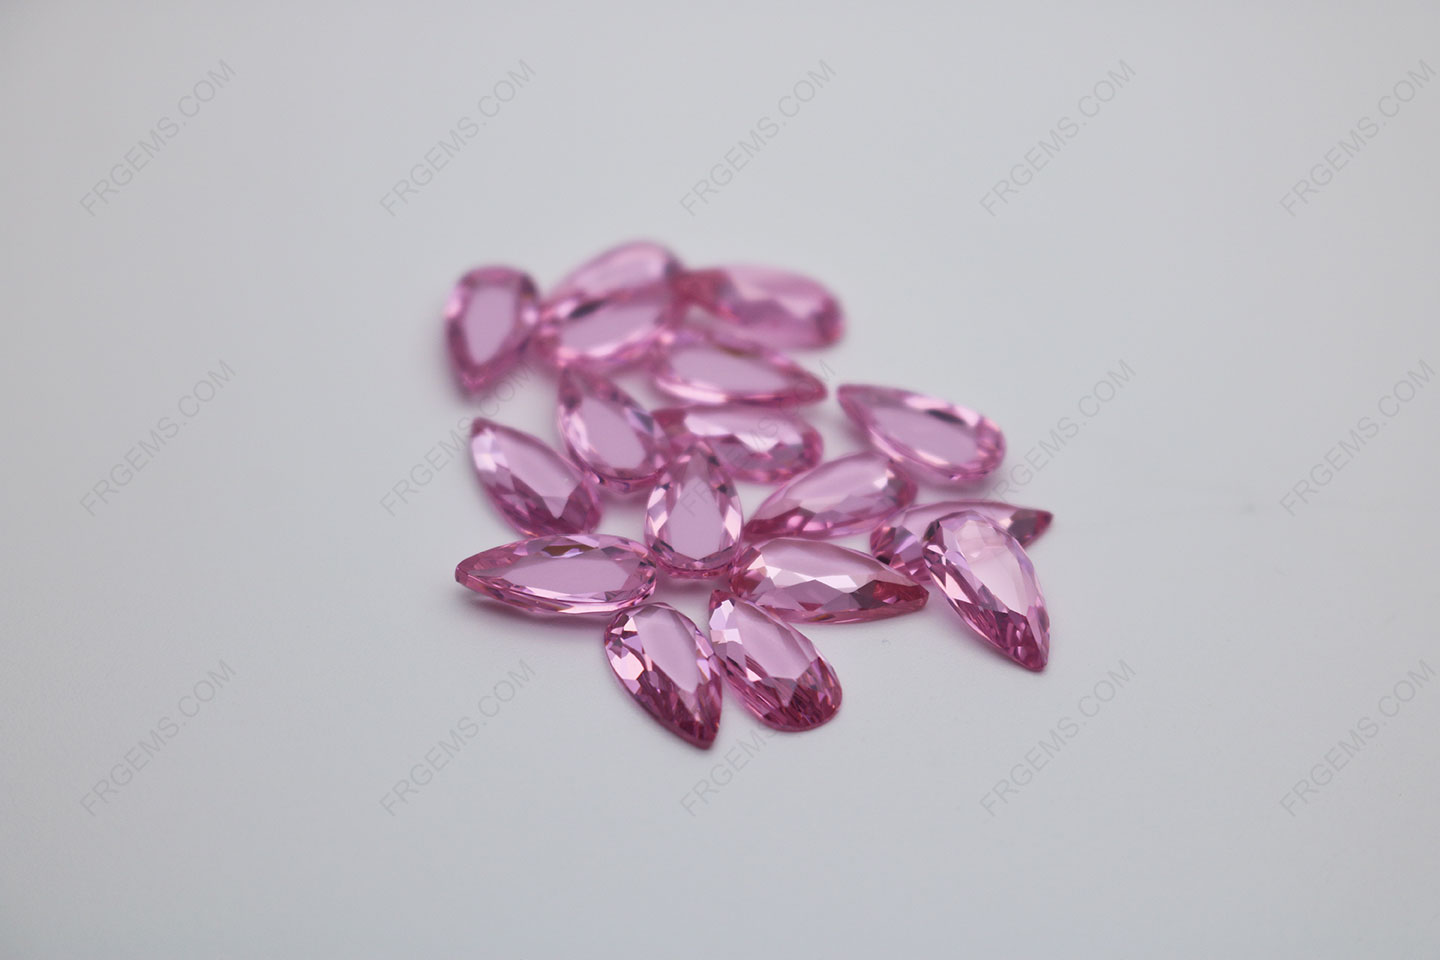 Cubic_Zirconia Pink Pear Shape diamond faceted cut face Flat Bottom 12x6mm stones CZ03 IMG_0163